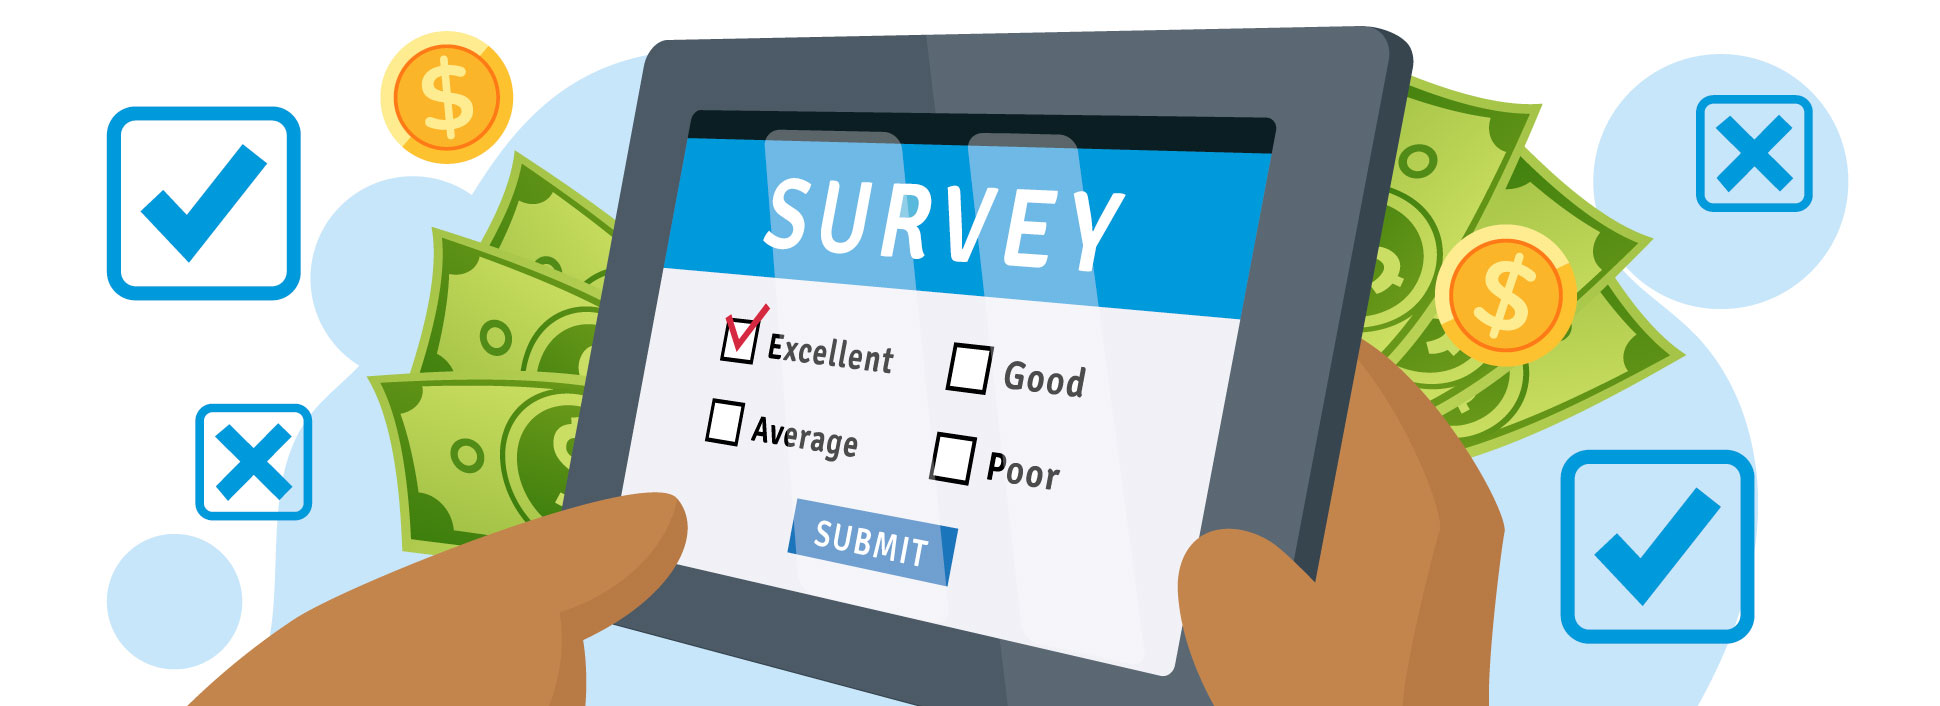 Earn Money From Home Using Survey Applications